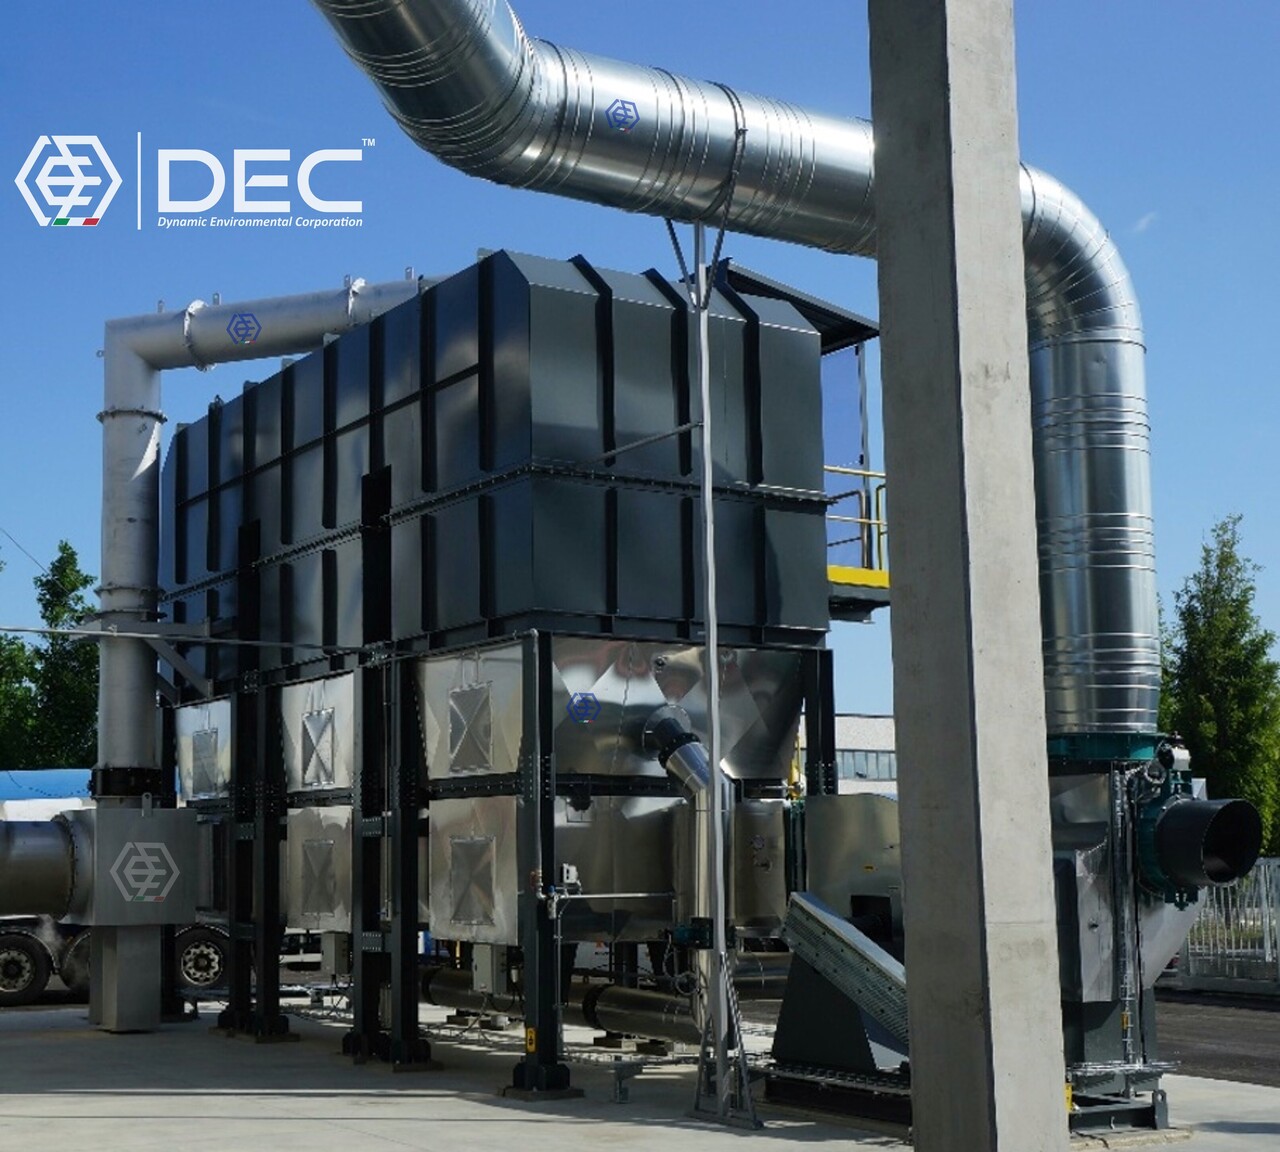 DEC, DEC IMPIANTI, thermal oxidation, Thermal oxidizer, Thermal incinerator, Oxidation equipment, Regenerative thermal oxidizer (RTO), Catalytic oxidizer, Recuperative thermal oxidizer, GHG, CO2, NOx, CO, N2O, direct-fired thermal oxidizer, Afterburner, Air pollution control, Industrial exhaust treatment, Volatile organic compounds (VOCs), Hazardous air pollutants (HAPs), Emission control system, Pollution abatement, Combustion chamber, Destruction efficiency, Heat recovery, Exhaust gas treatment, Industrial emissions control, Energy efficiency, Furnaces, RTO, RCO, XTO, TOX, VOC, HAP, used Thermal Oxidizer, Thermal Oxidation, Thermal Oxidizer Service, Thermal Oxidizer Repair, Thermal Oxidizer Maintenance, oxidiser, MACT, BACT, RACT, EPA, Title V Permit, Destruction Efficiency, 99% Destruction Efficiency, Combustion, Combustion Controls, environmental services